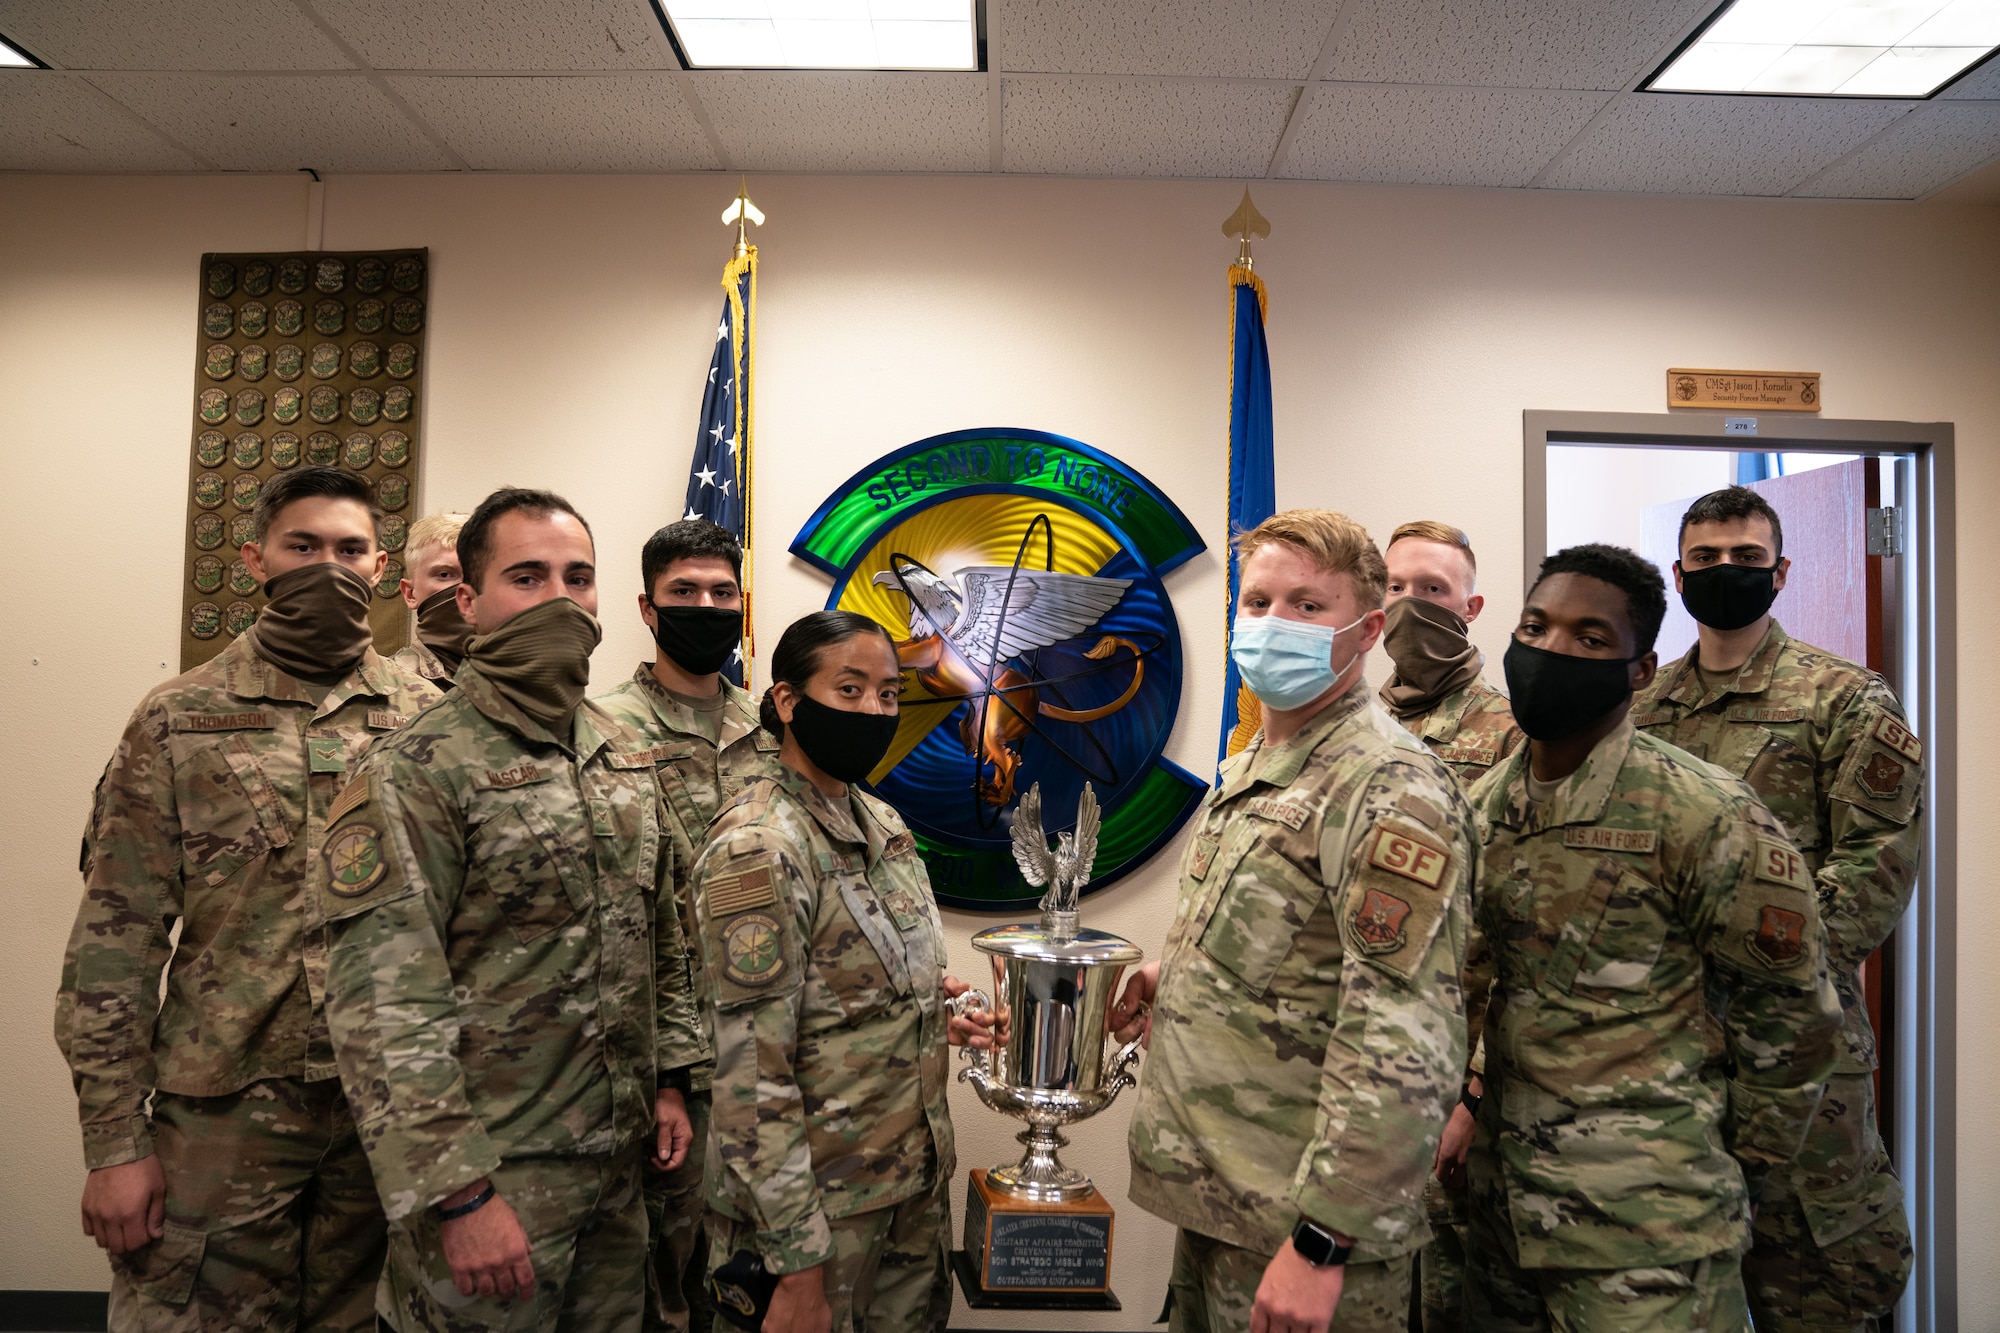 The 790th Missile Security Forces Squadron Airmen pose for photos with the Cheyenne Trophy on F.E. Warren Air Force Base, Wyoming, Sept. 10, 2020. The Greater Cheyenne Chamber of Commerce recently presented the Military Affairs Committee’s Cheyenne Trophy to the 790th Missile Security Force Squadron for mission accomplishments, patriotism, off-duty volunteerism and community involvement resulting in a positive impact on the city of Cheyenne and its residents. (U.S. Air Force photos by Joseph Coslett)